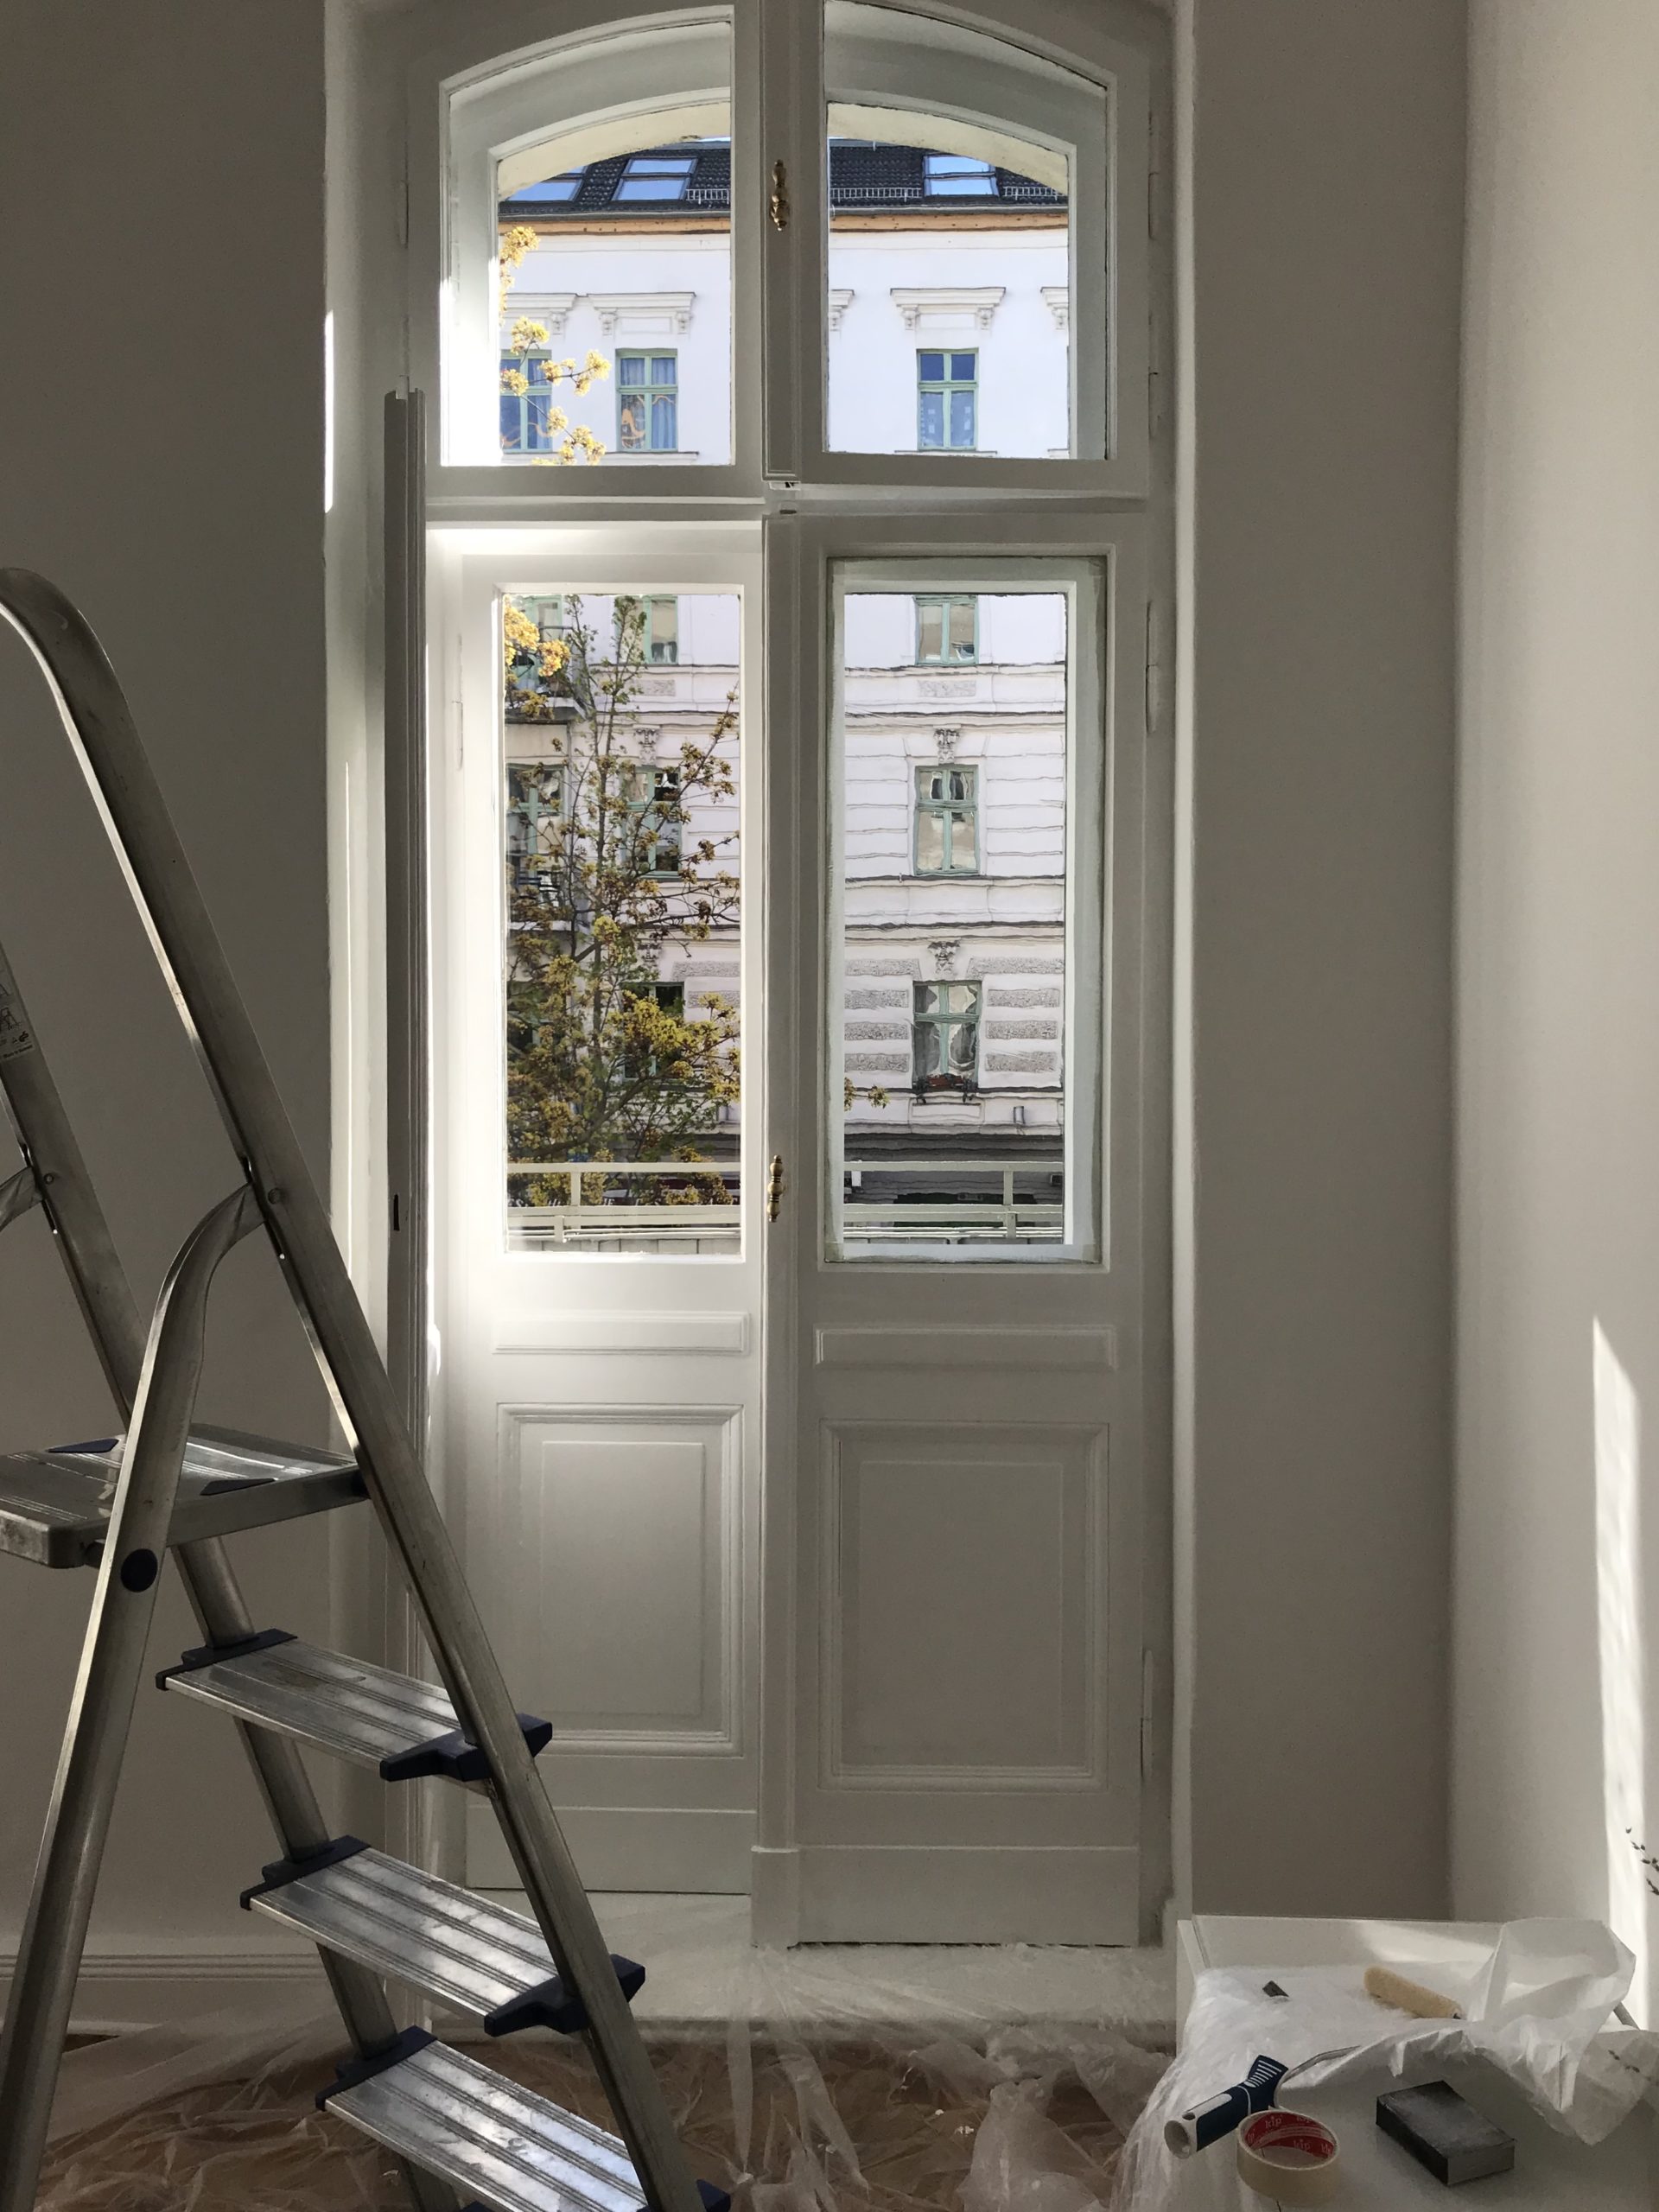 Interior Design Paint Project, White French Doors, Home Berlin, Inspo, Minimal Decor, neutral Aesthetic | RG Daily Blog